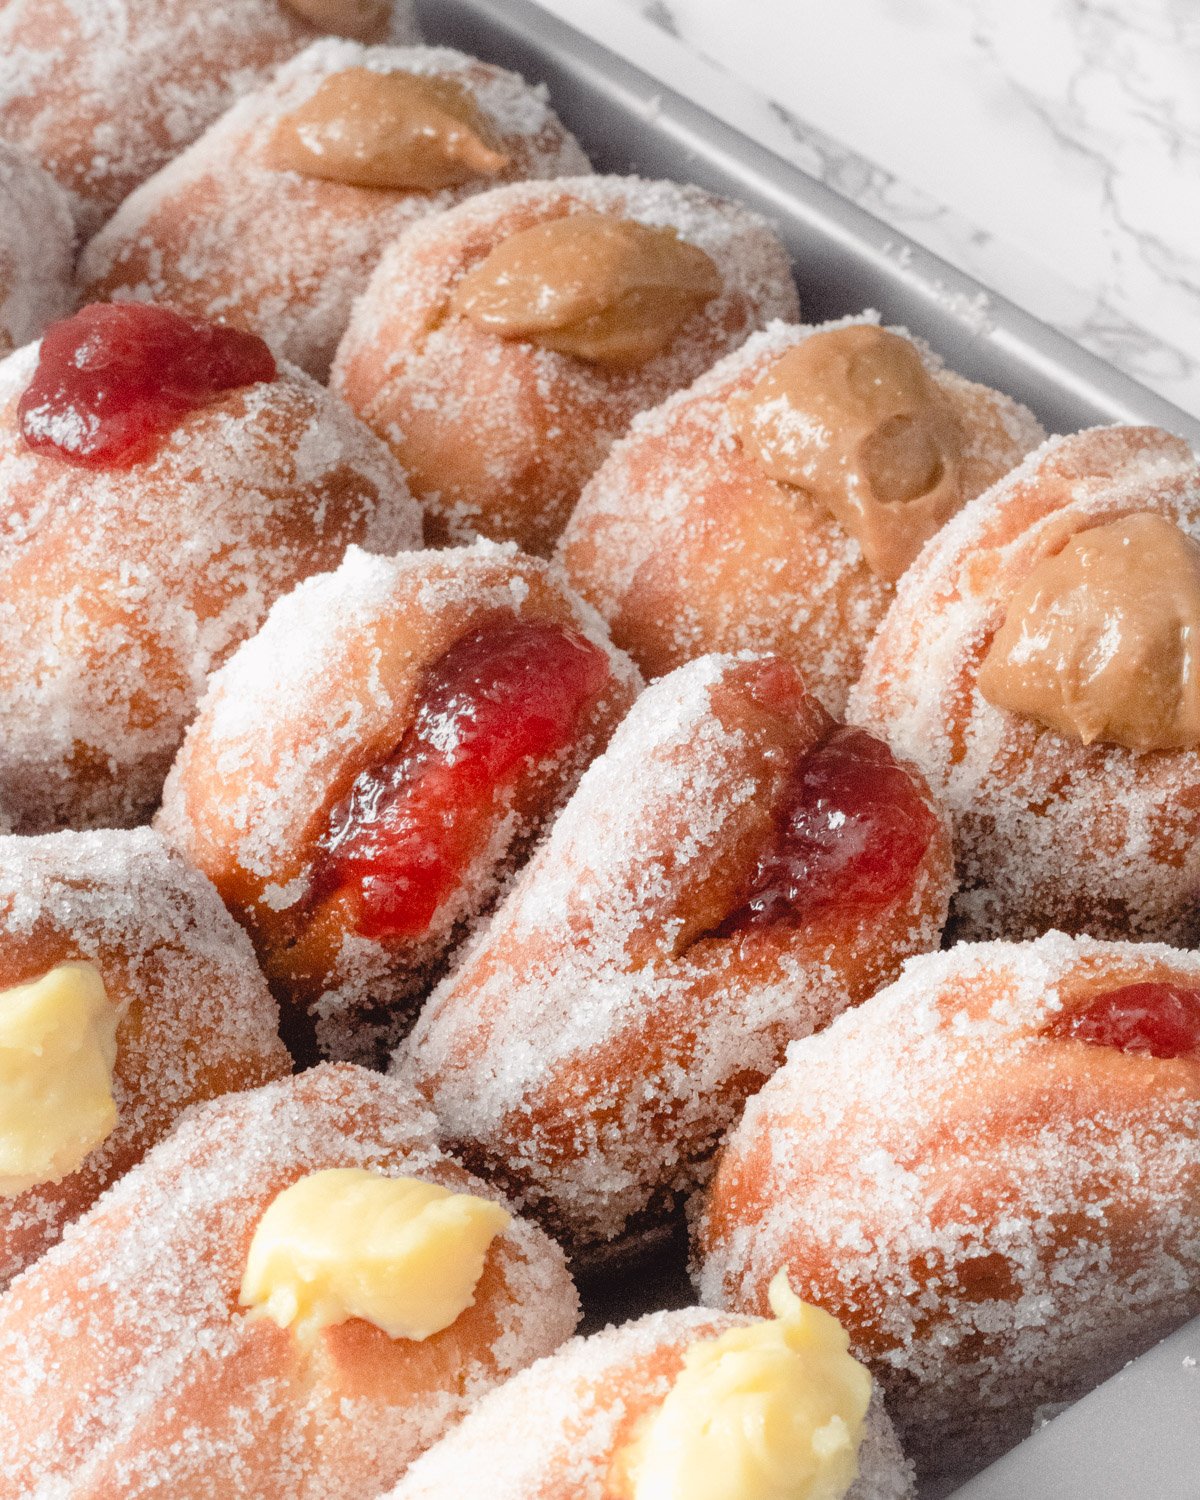 A tray of sugar coated paczki Polish donuts with different fillings.